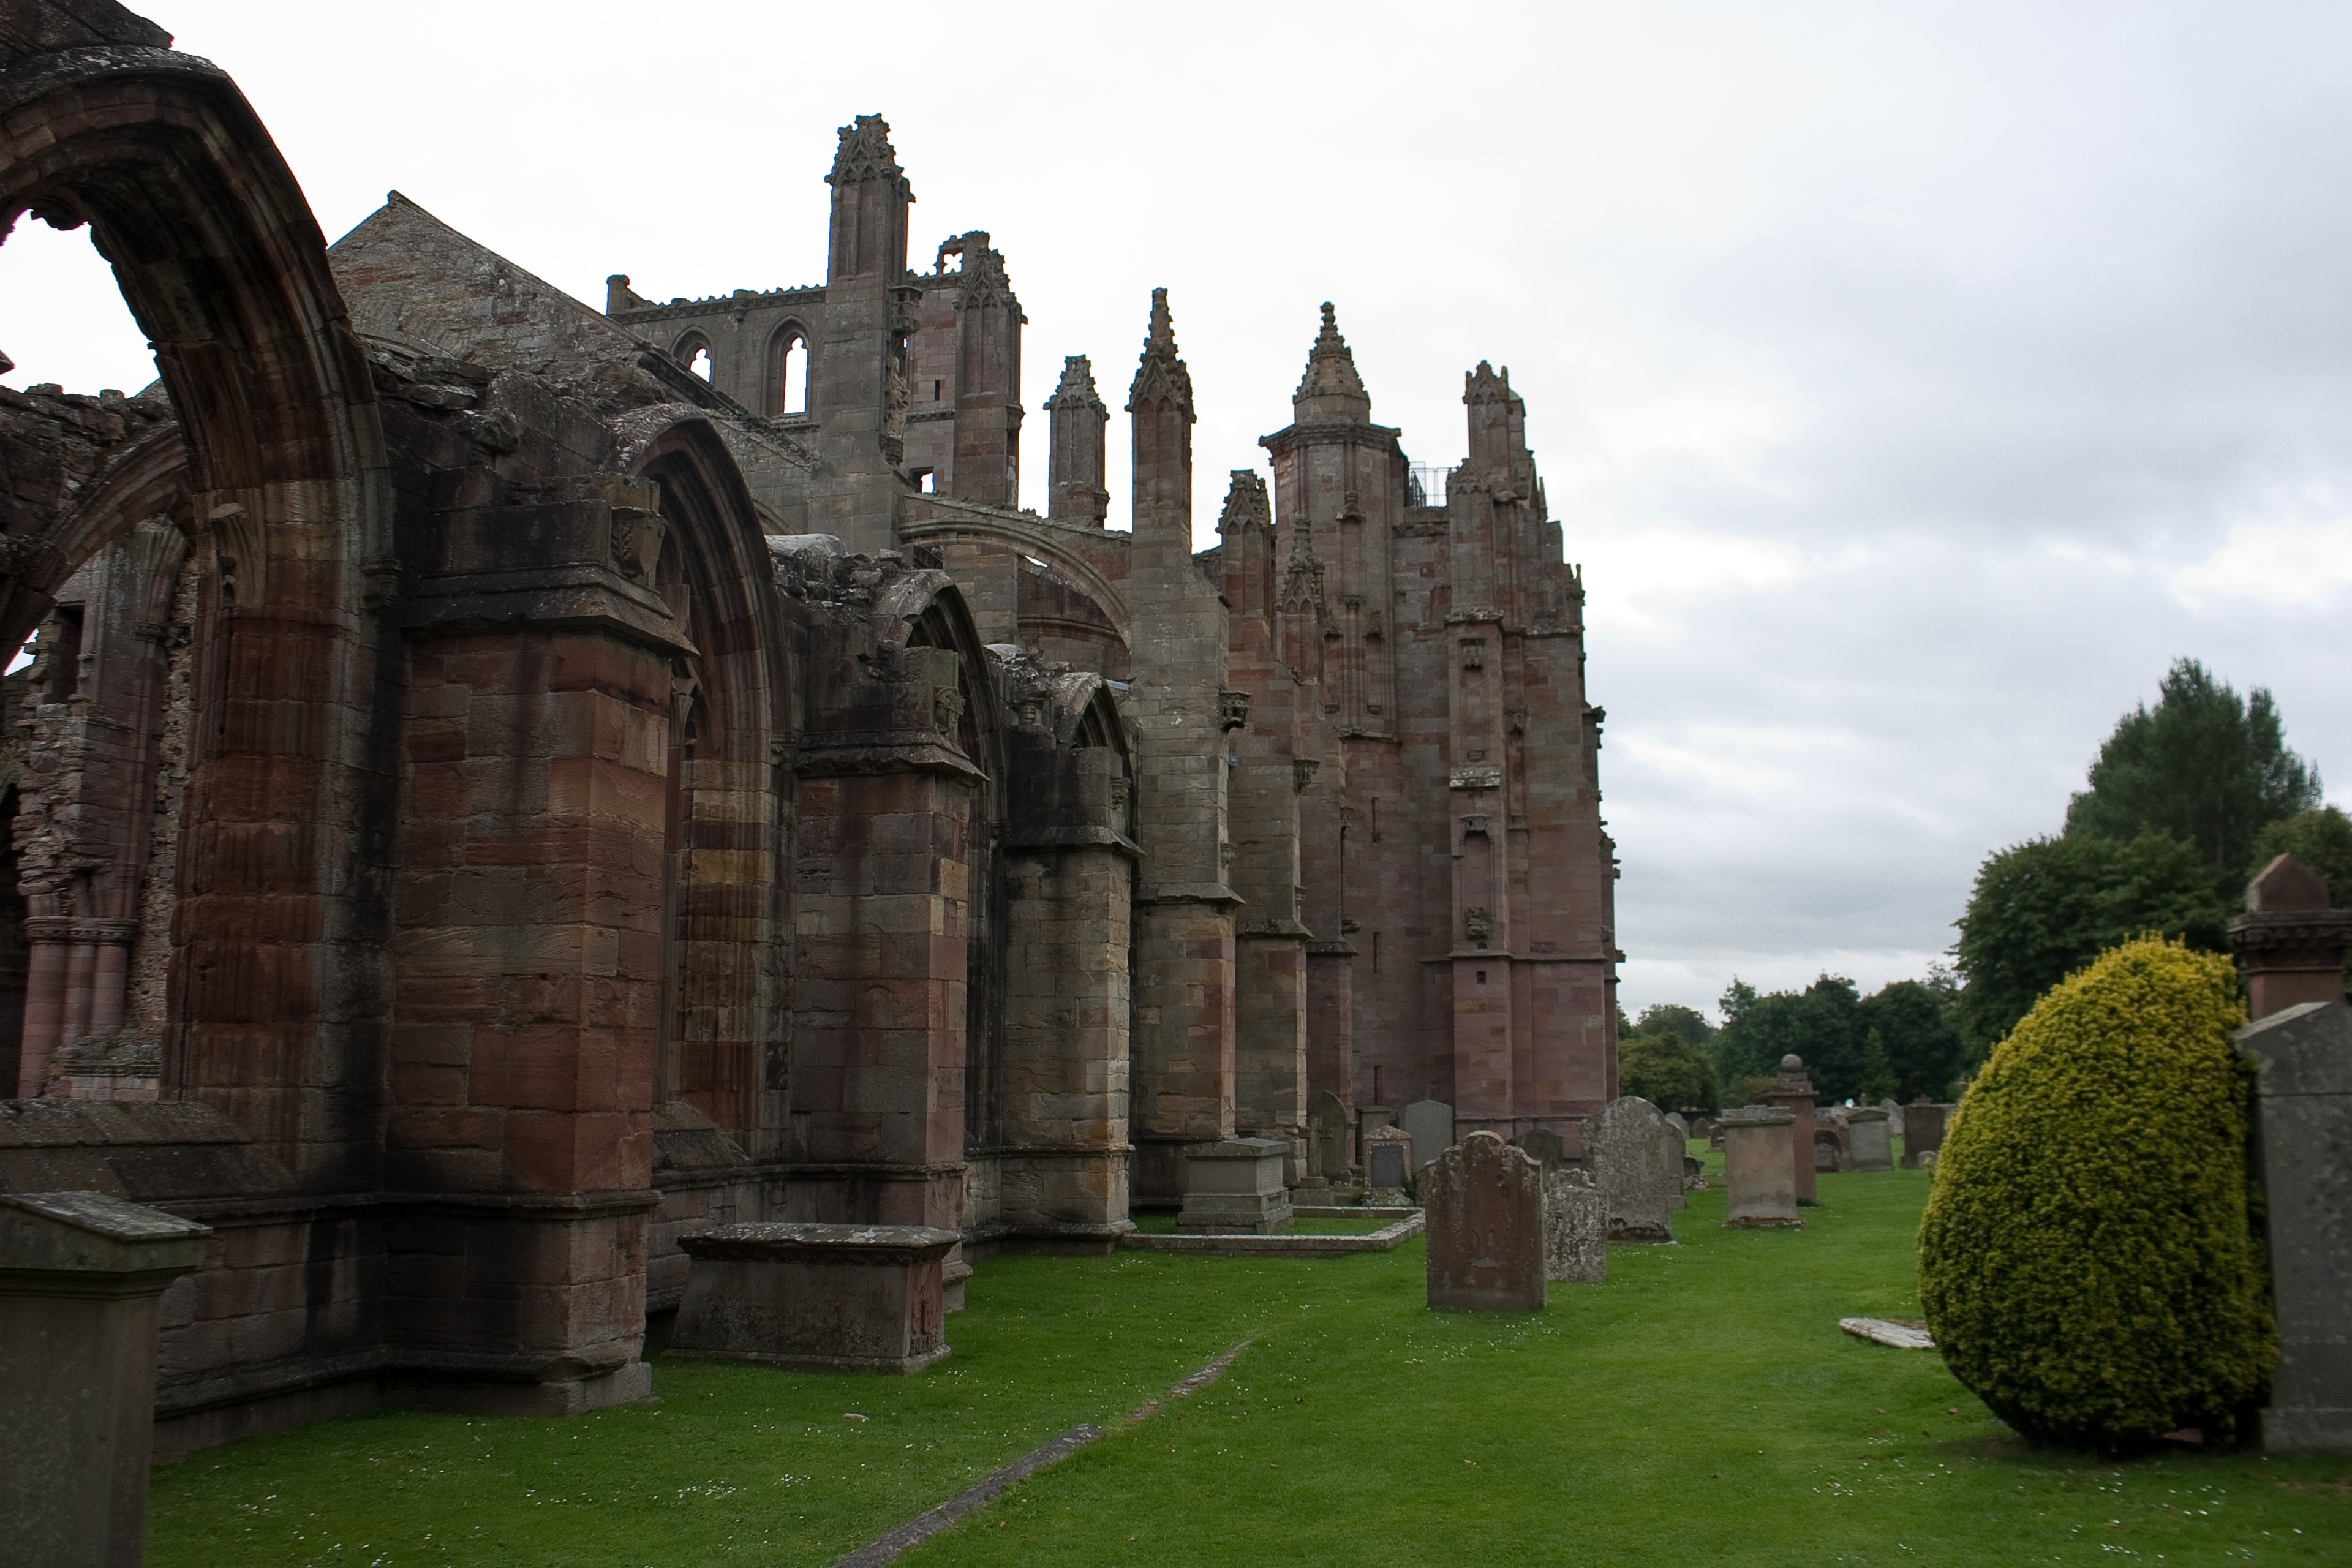 Melrose Abbey is located in Melrose, Scotland. It was built in 1138 and abandoned in 1609; it is now a ruin. It is considered to be one of the most beautiful church buildings in the United Kingdom.